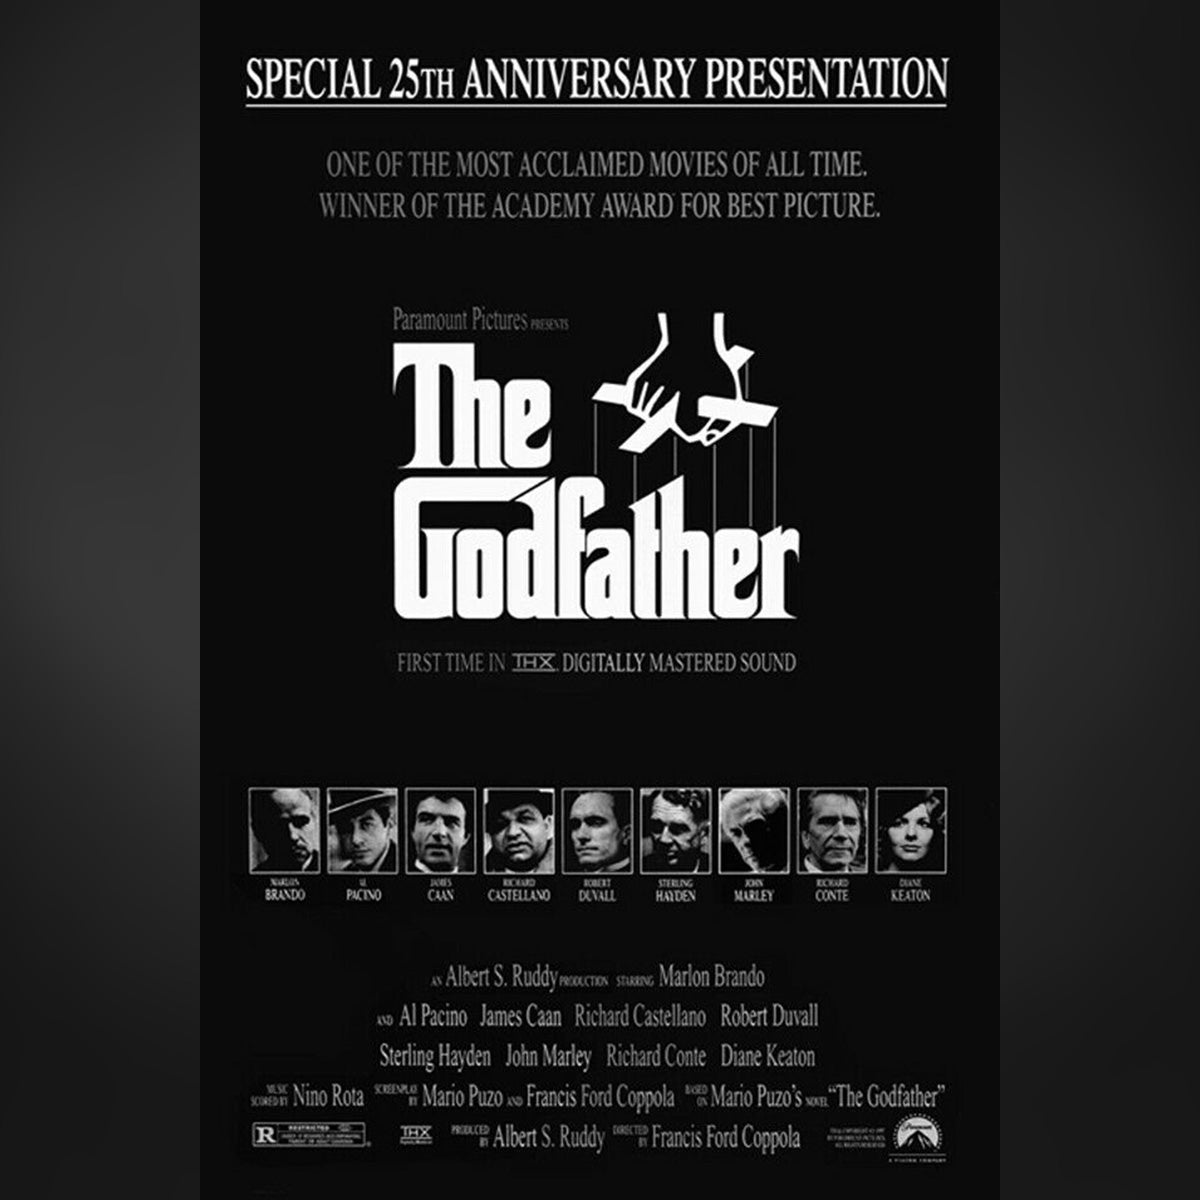 Original Movie Poster of Godfather, The (1997R)